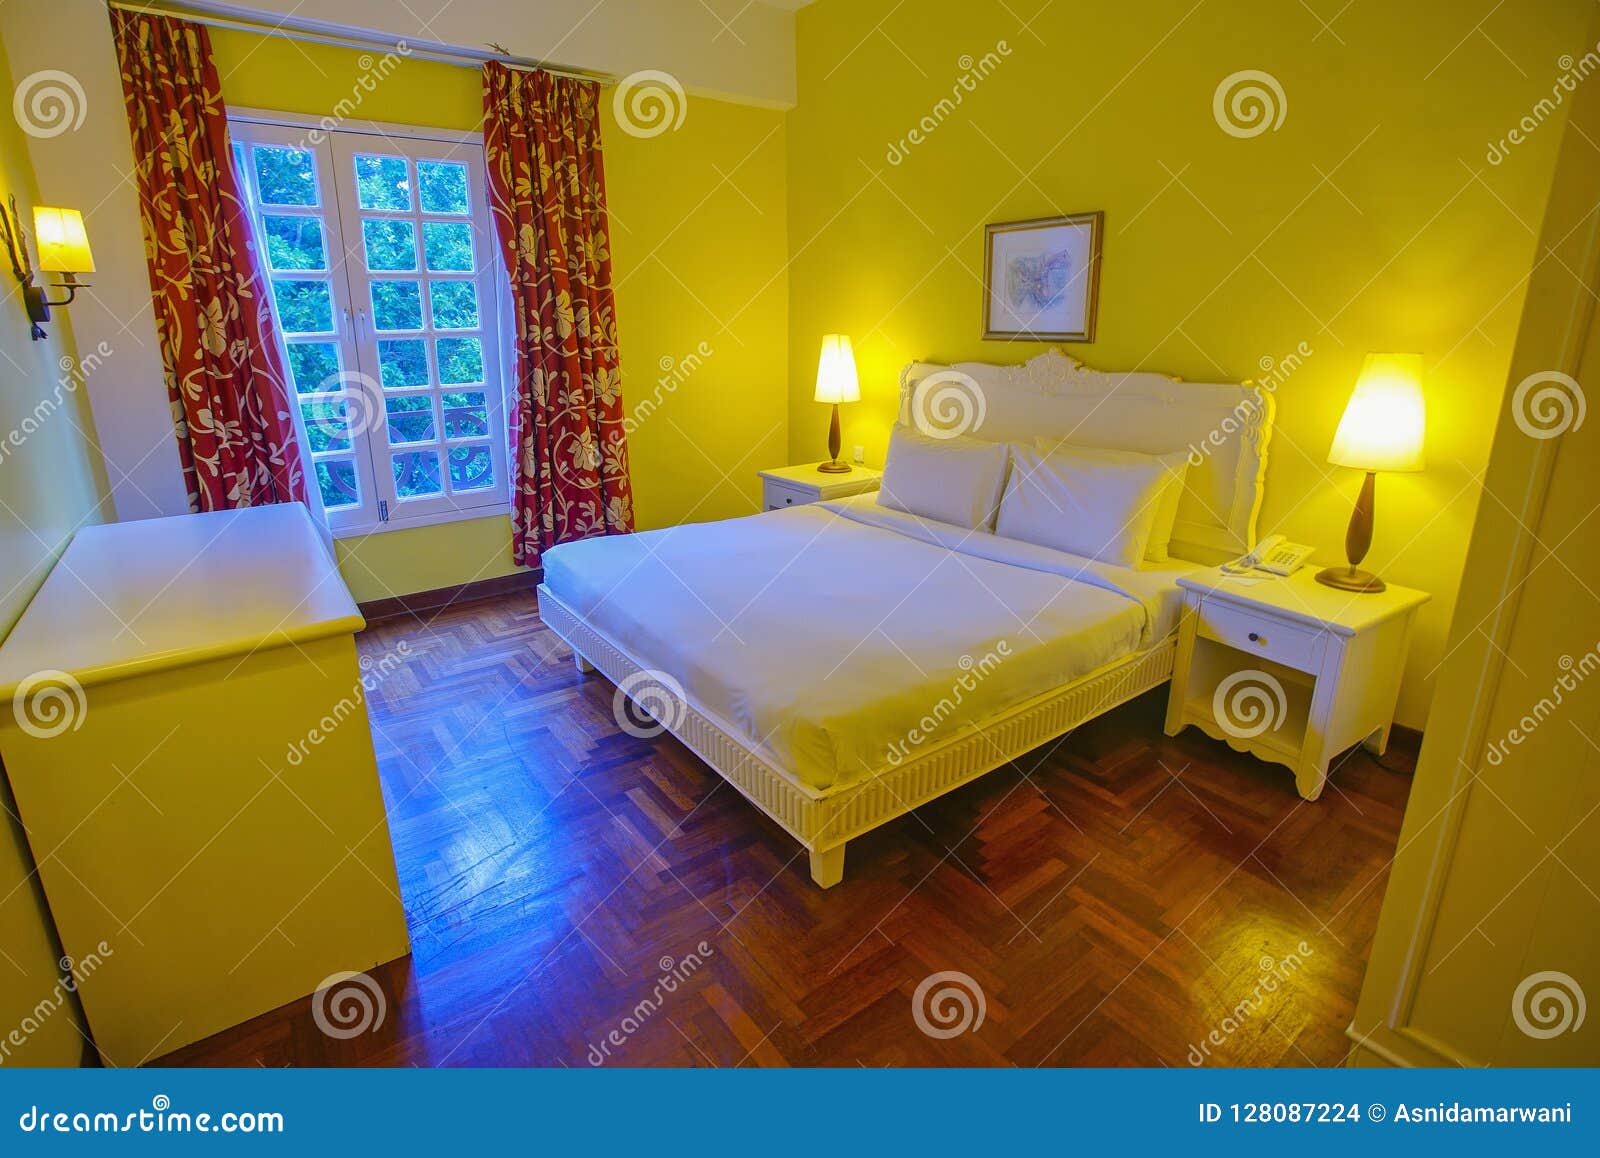 Simple and Luxury Hotel Room Decoration Stock Photo - Image of ...